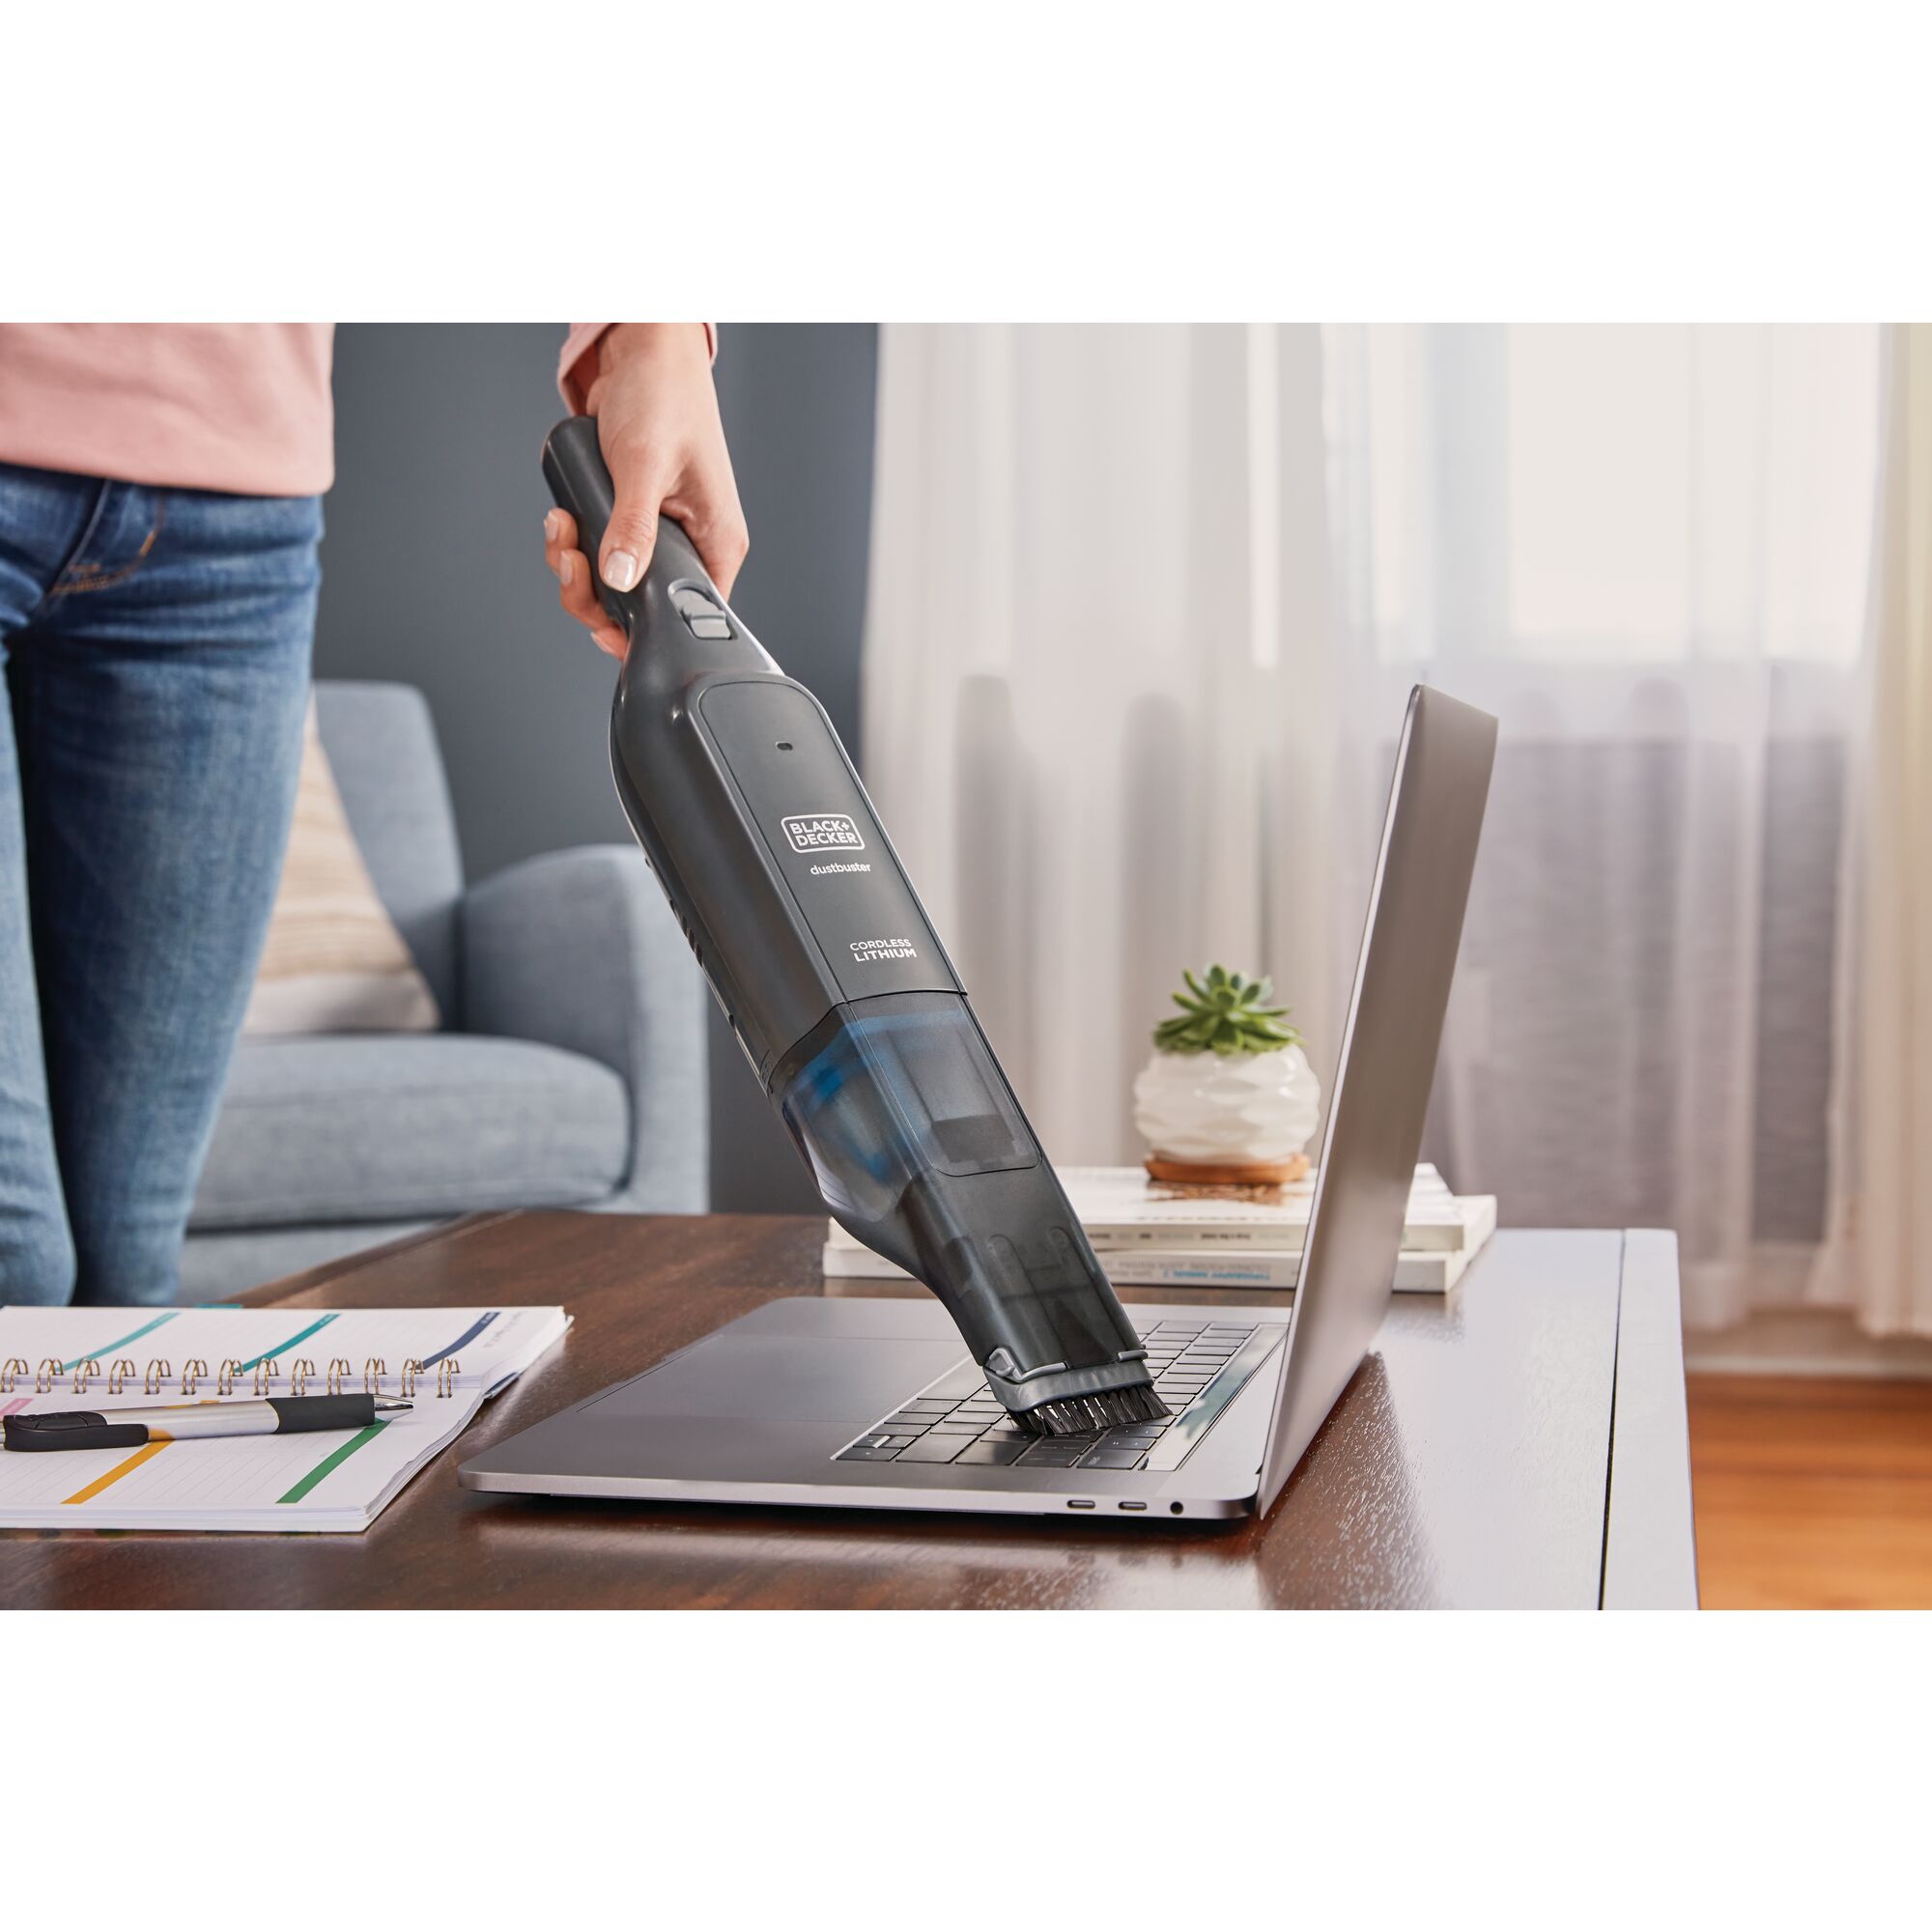 Dustbuster MAX Advanced Clean Cordless Hand Vacuum with brush attachment being used to clean keyboard of laptop.